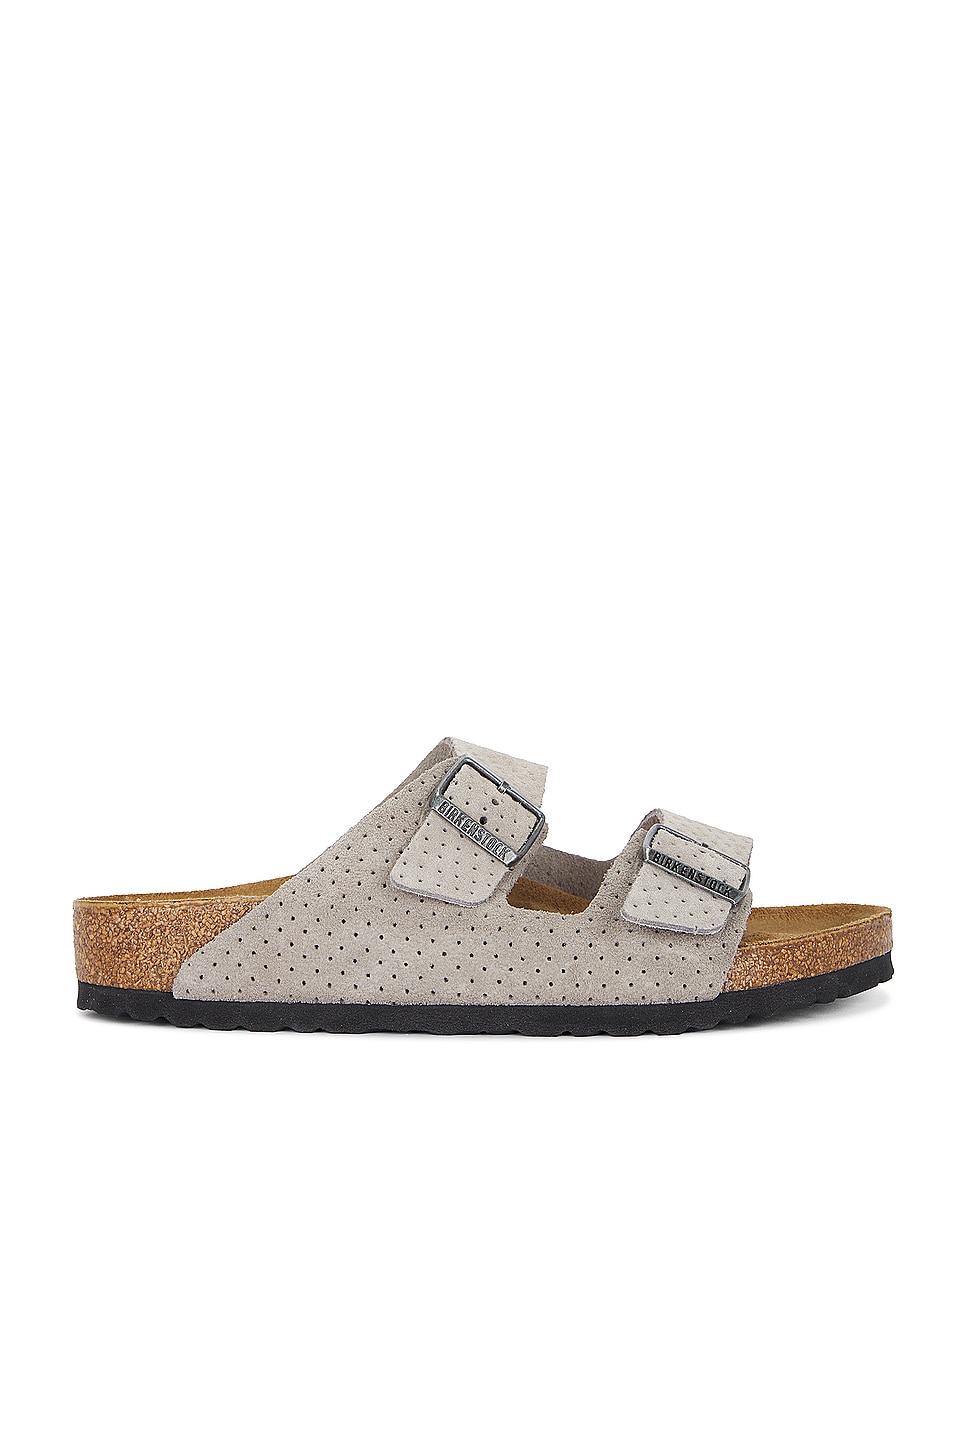 Image 1 of BIRKENSTOCK Arizona Dotted in Stone Coin